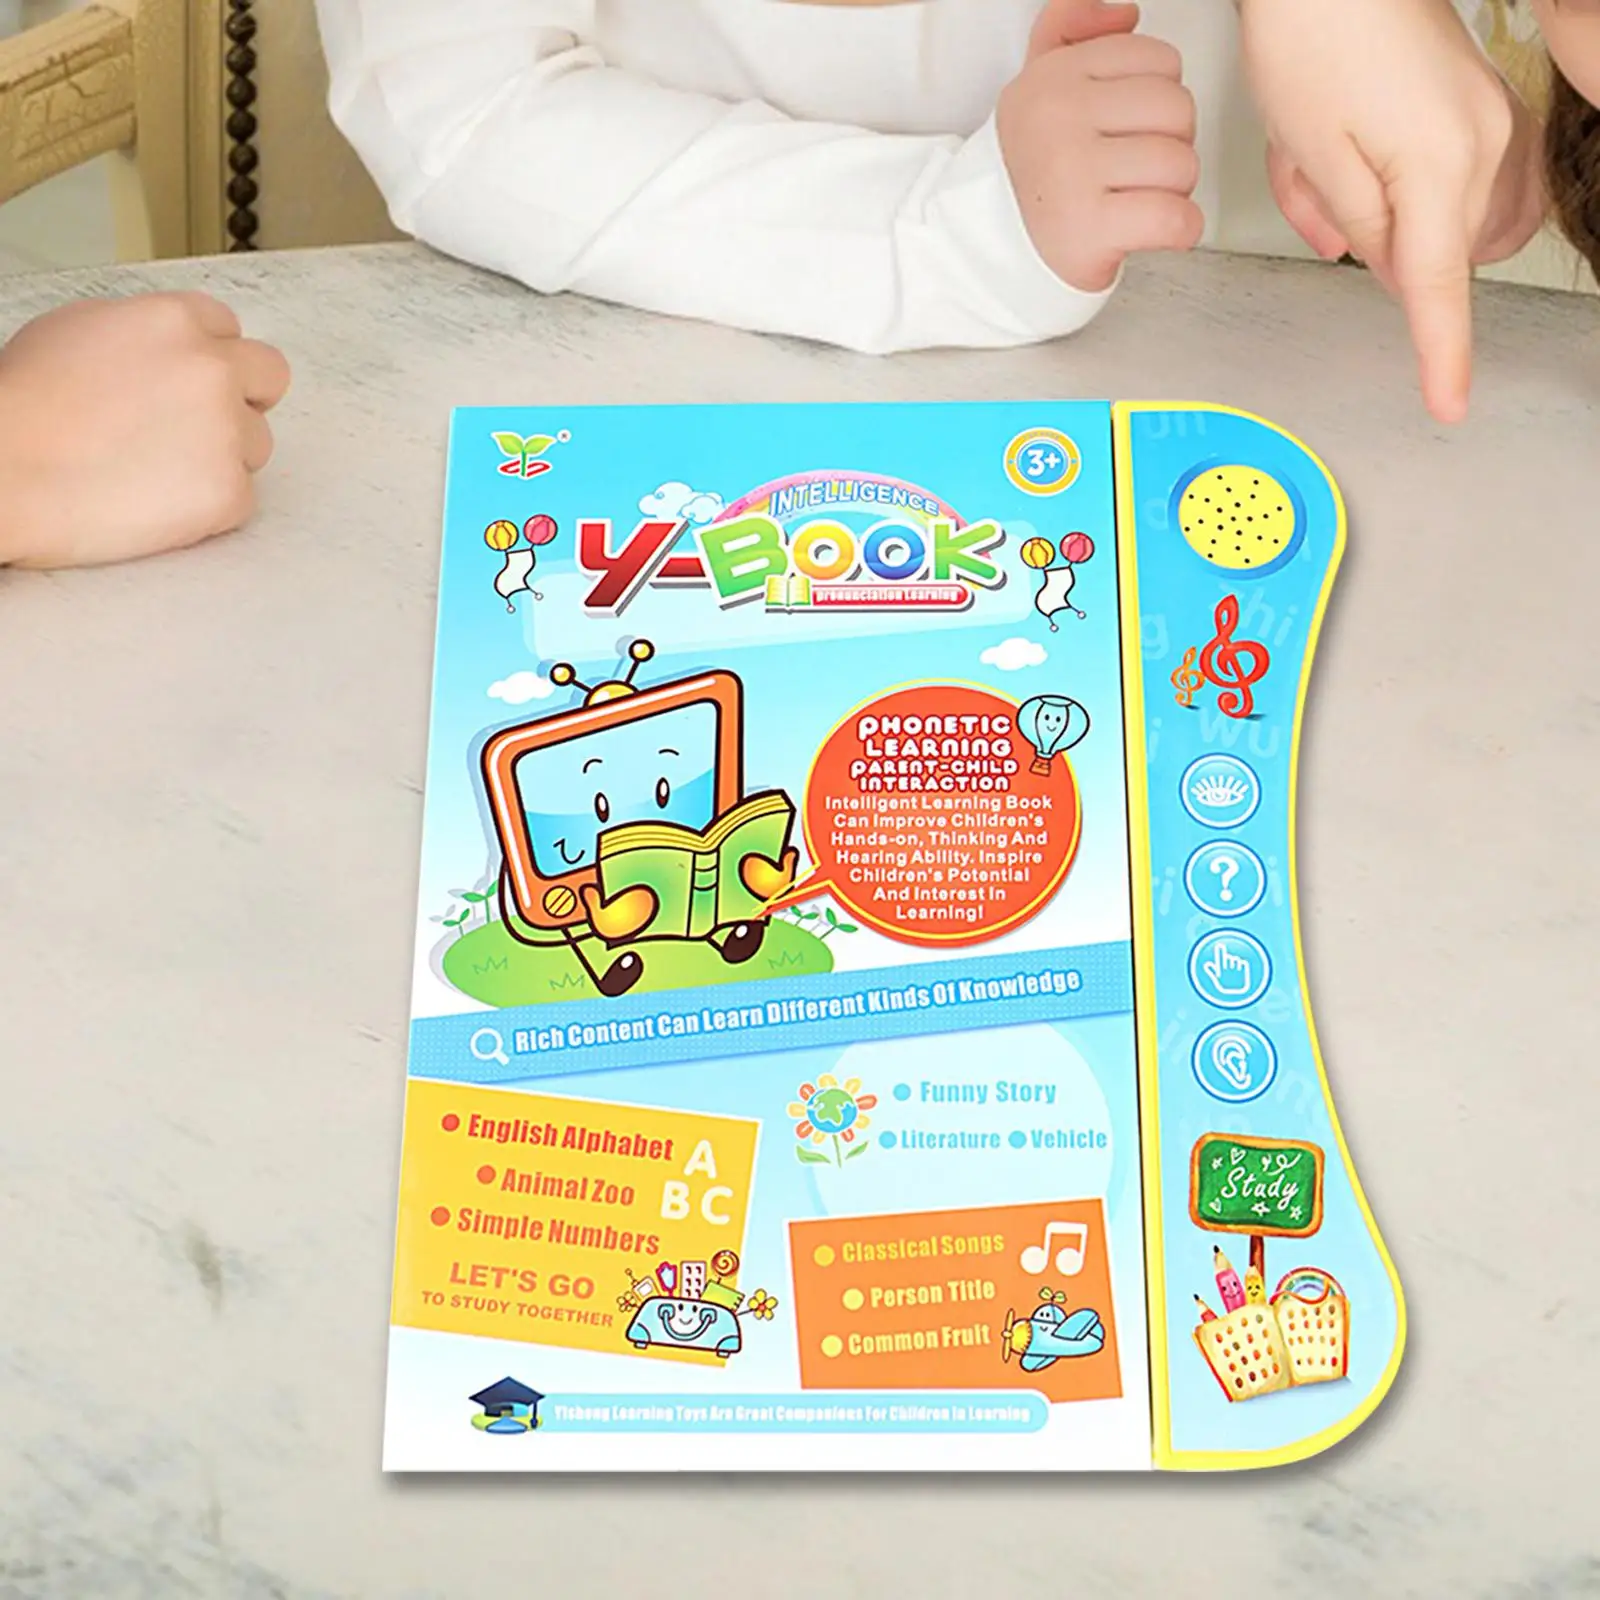 English interactive Gift sound book for Baby for Character Appellation